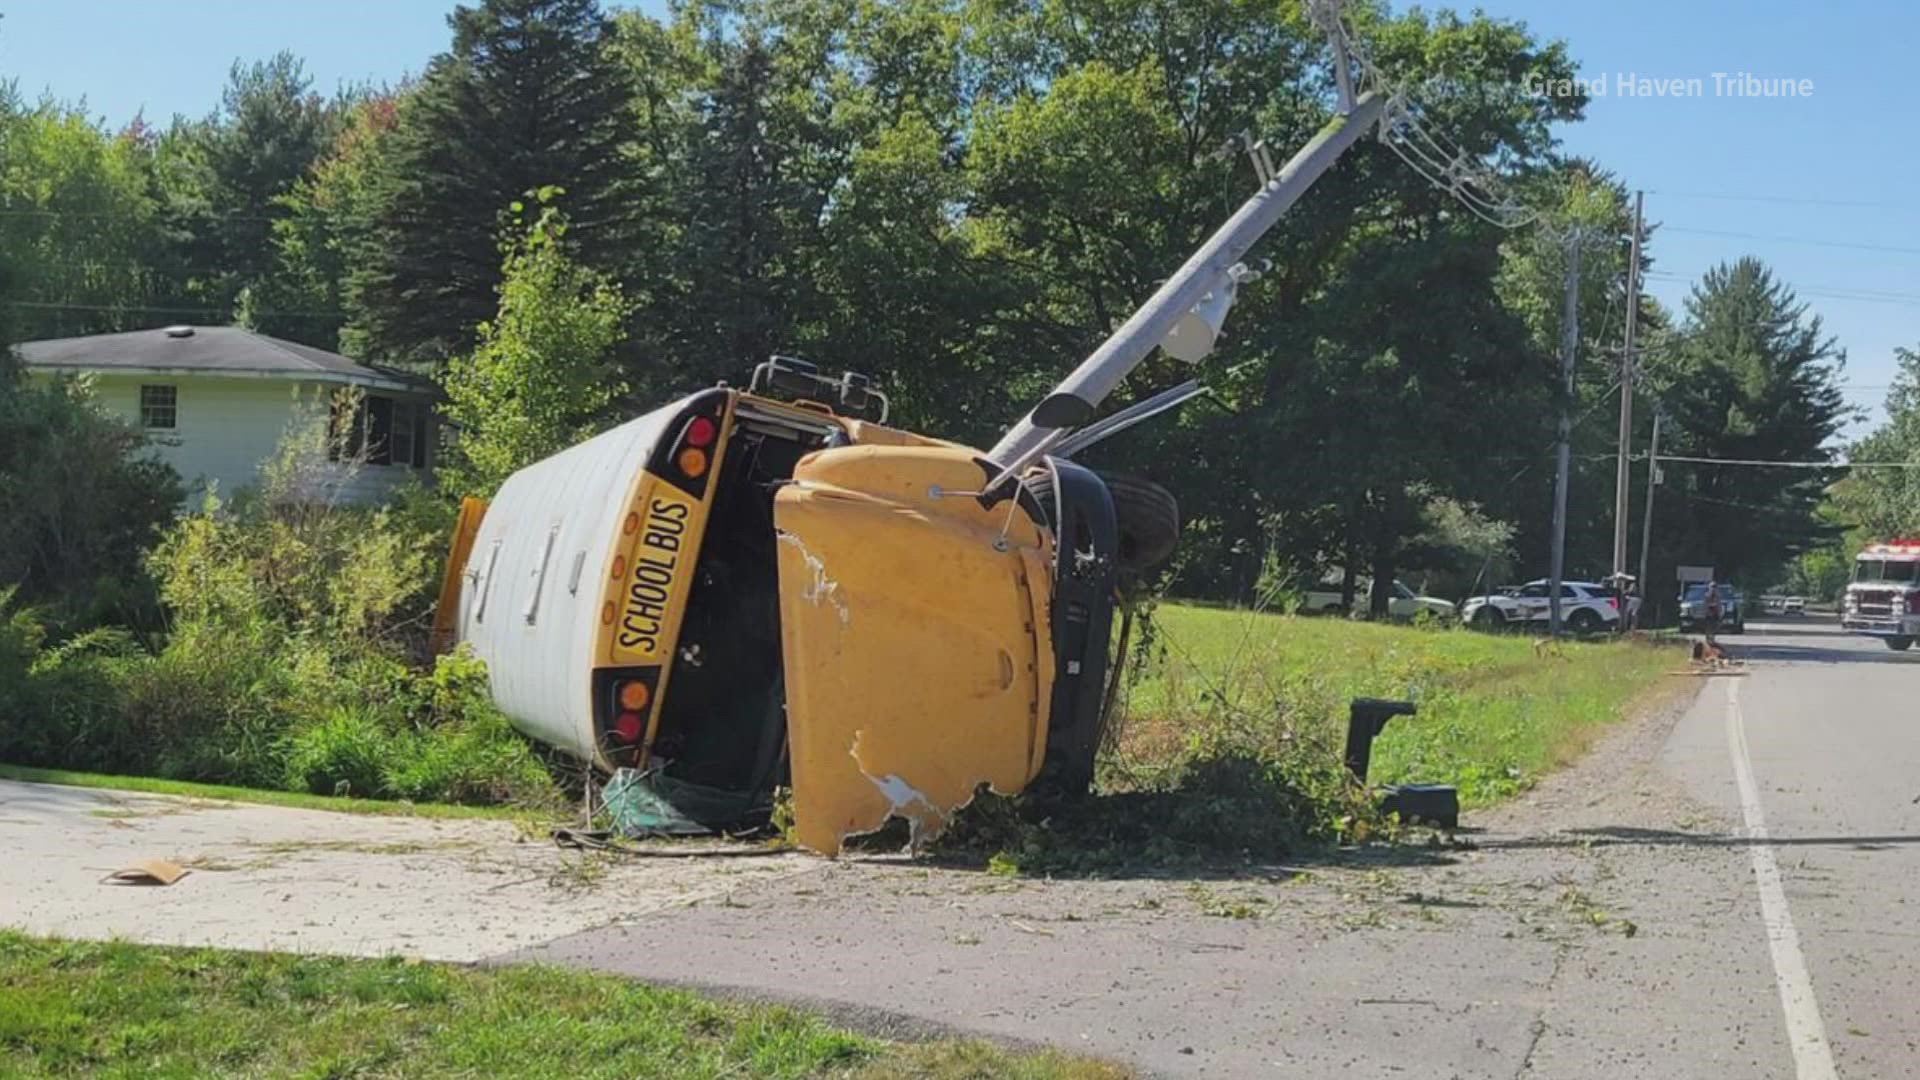 There were six children on the Spring Lake Public Schools bus at the time, and all apparently escaped injuries.